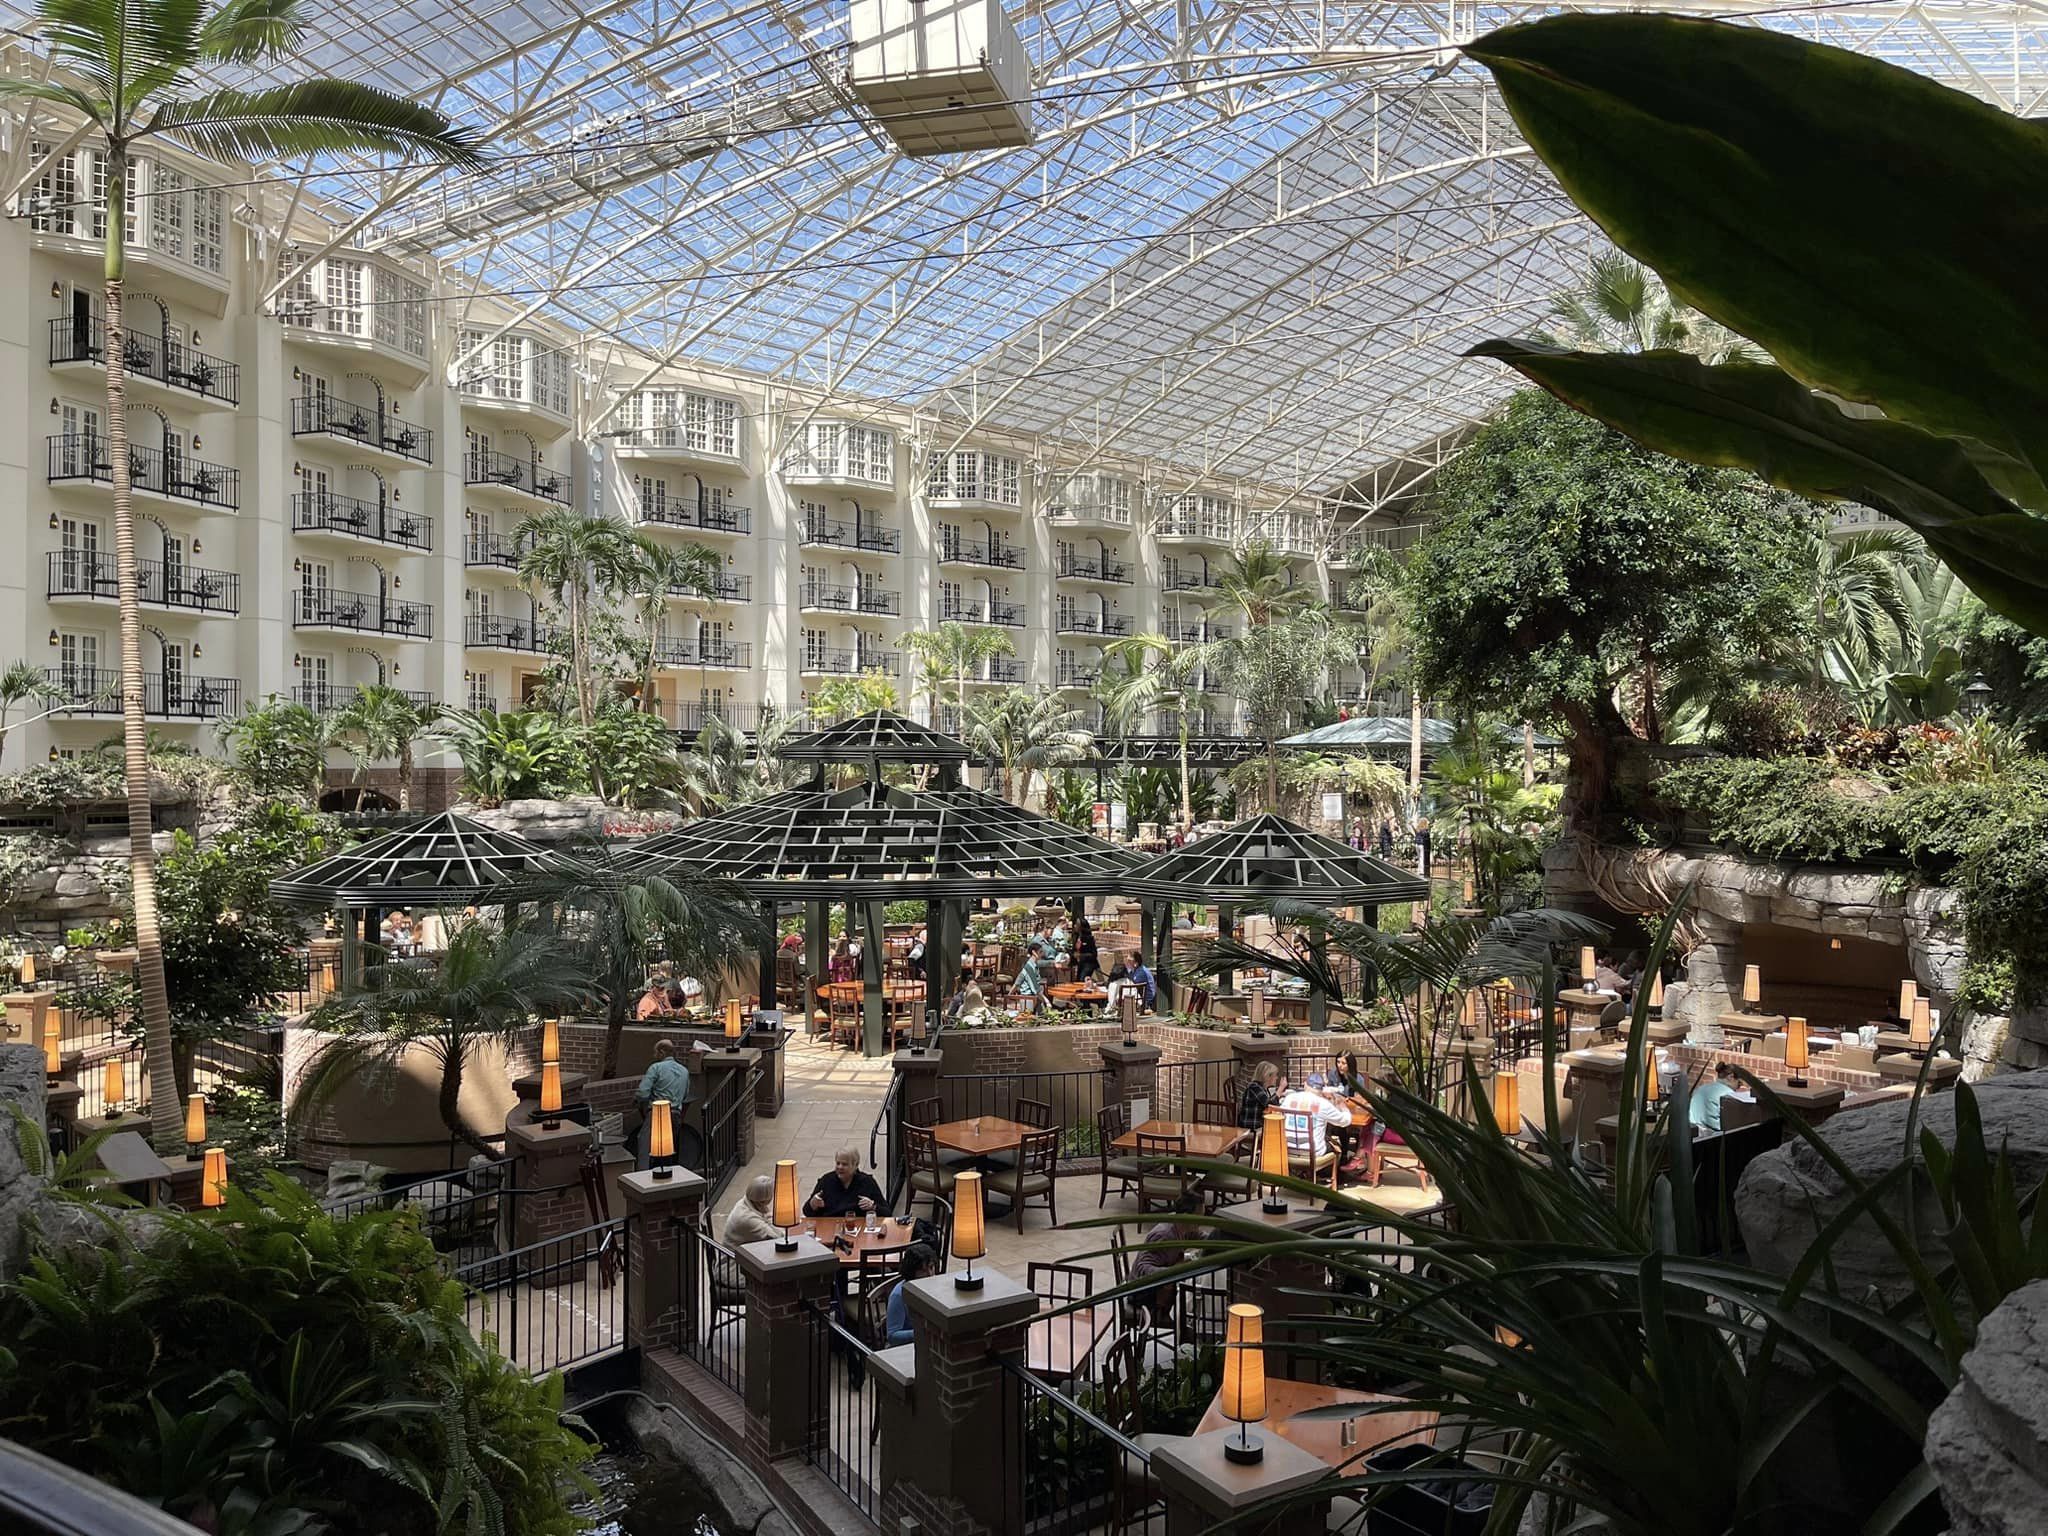 Garden Conservatory at the Gaylord Opryland Resort